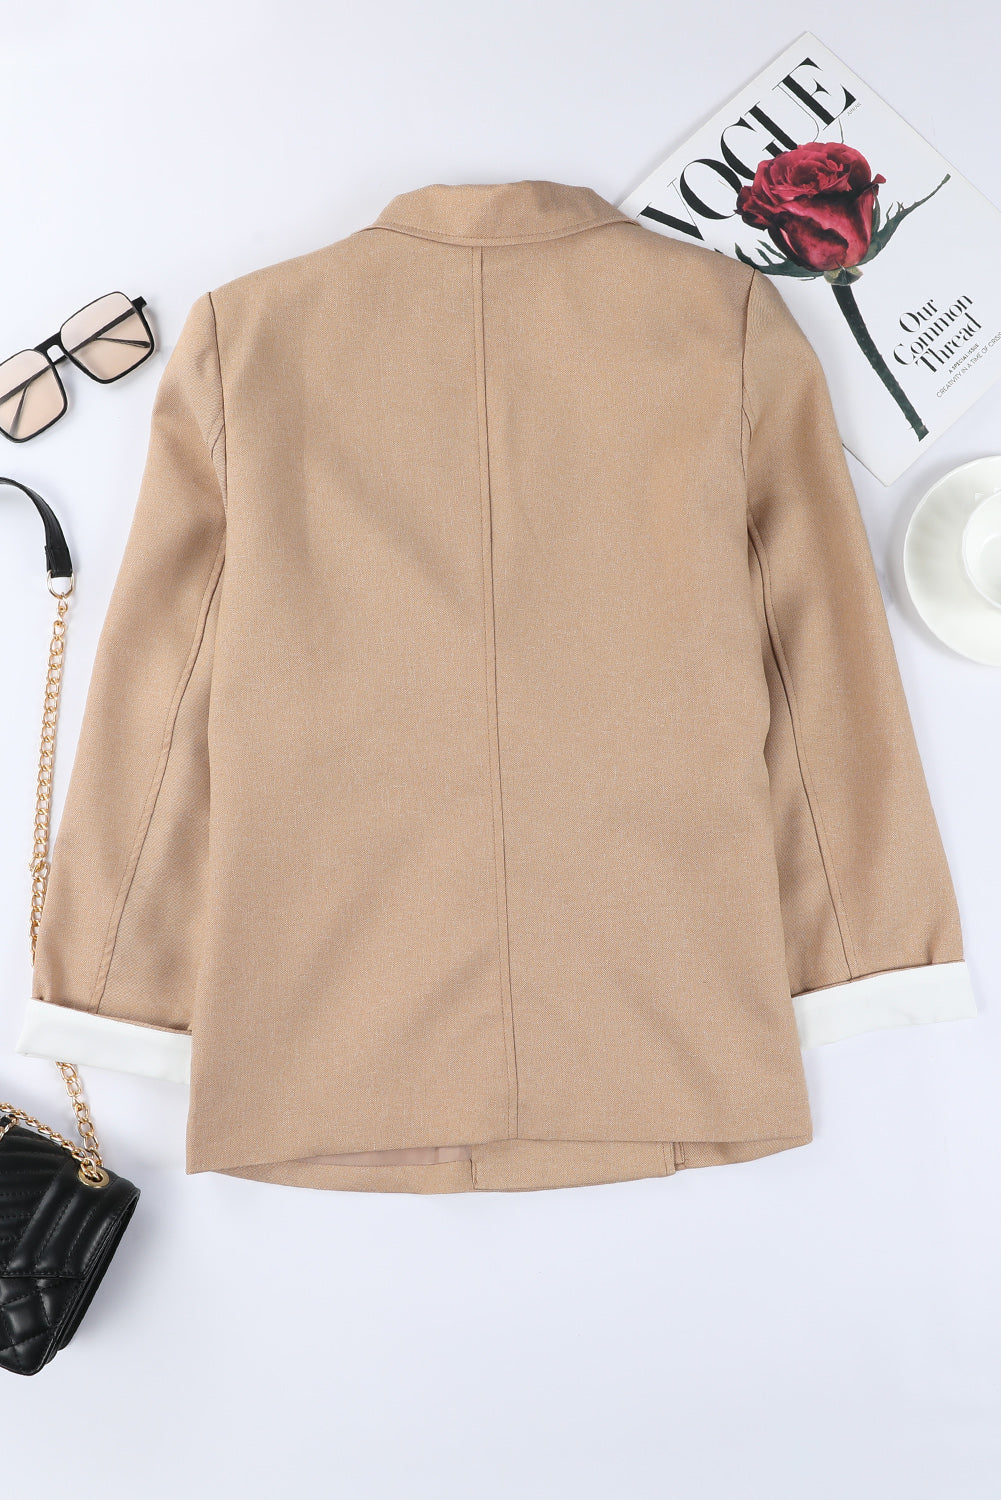 Apricot Buttoned Lapel Collar Blazer with Pocket